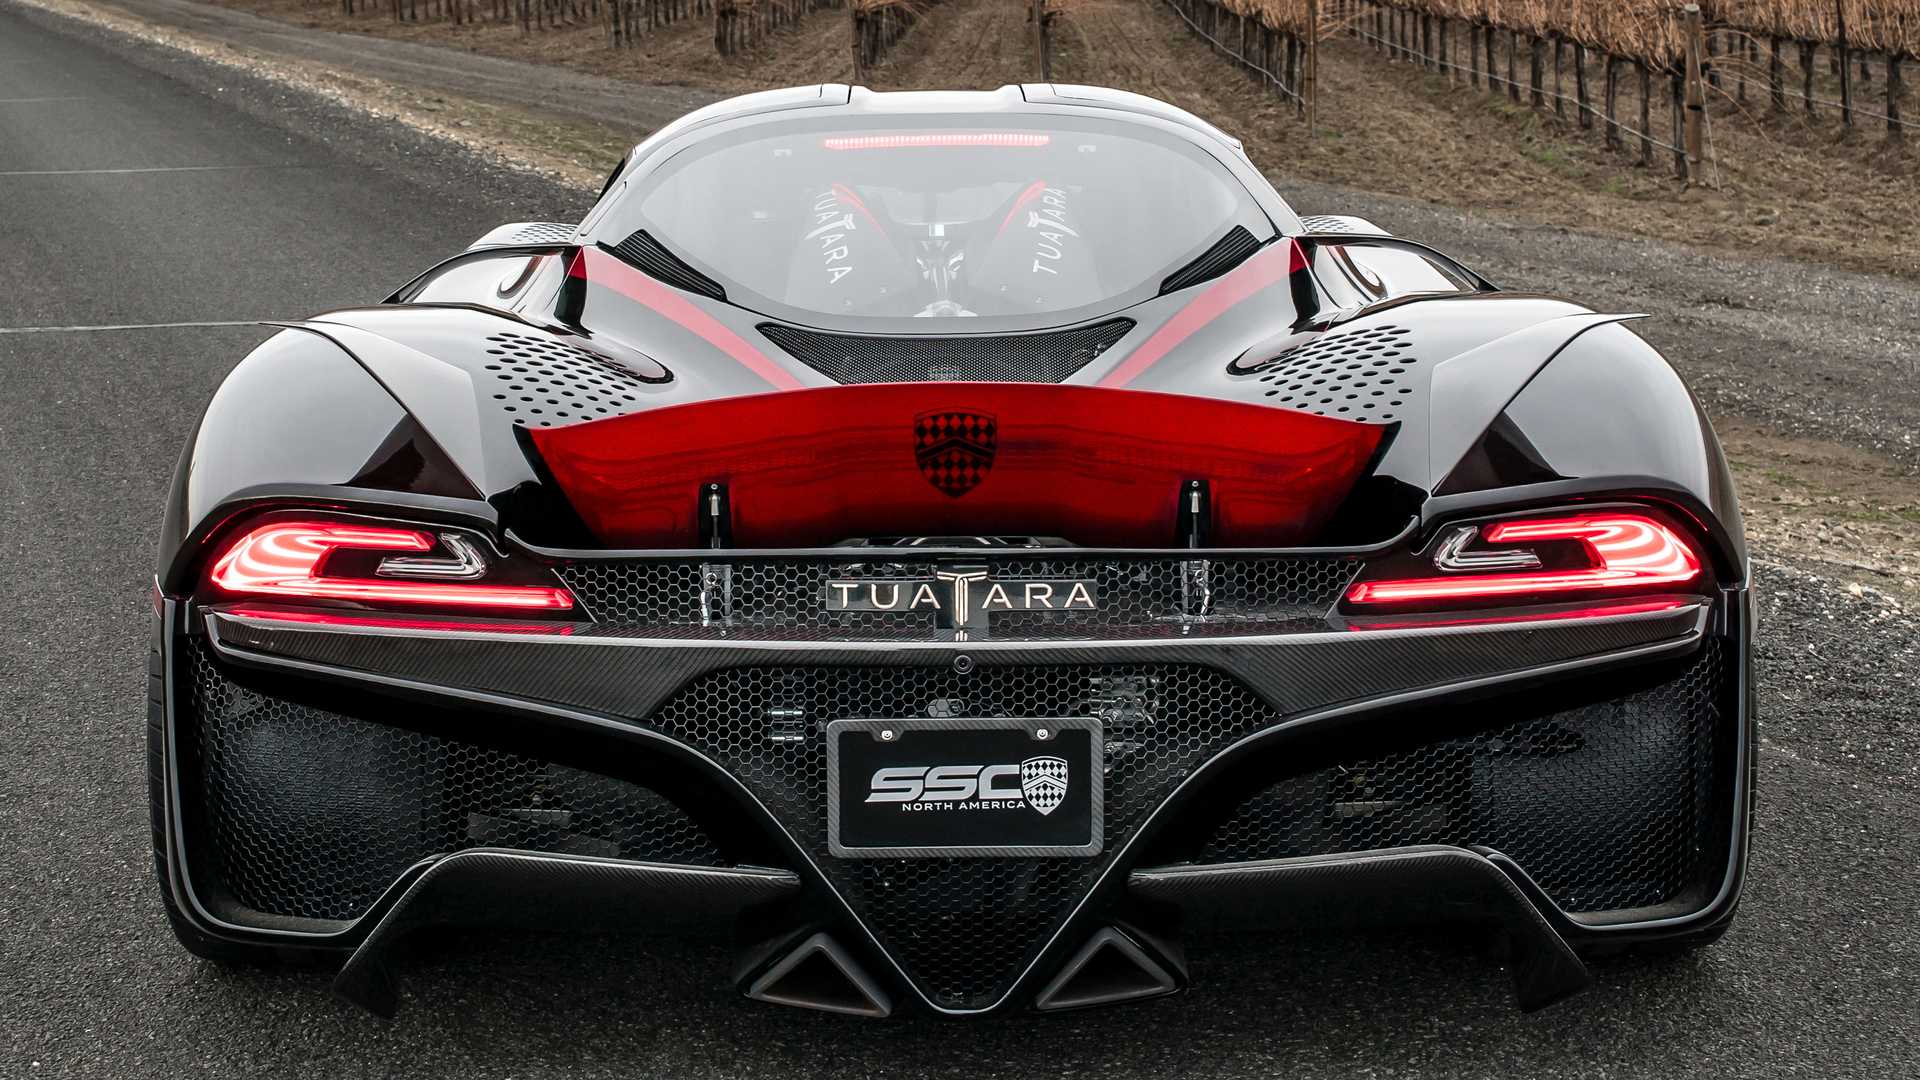 Man Who Drove Ssc Tuatara To Top Speed Claims Hypercar Can Hit Mph